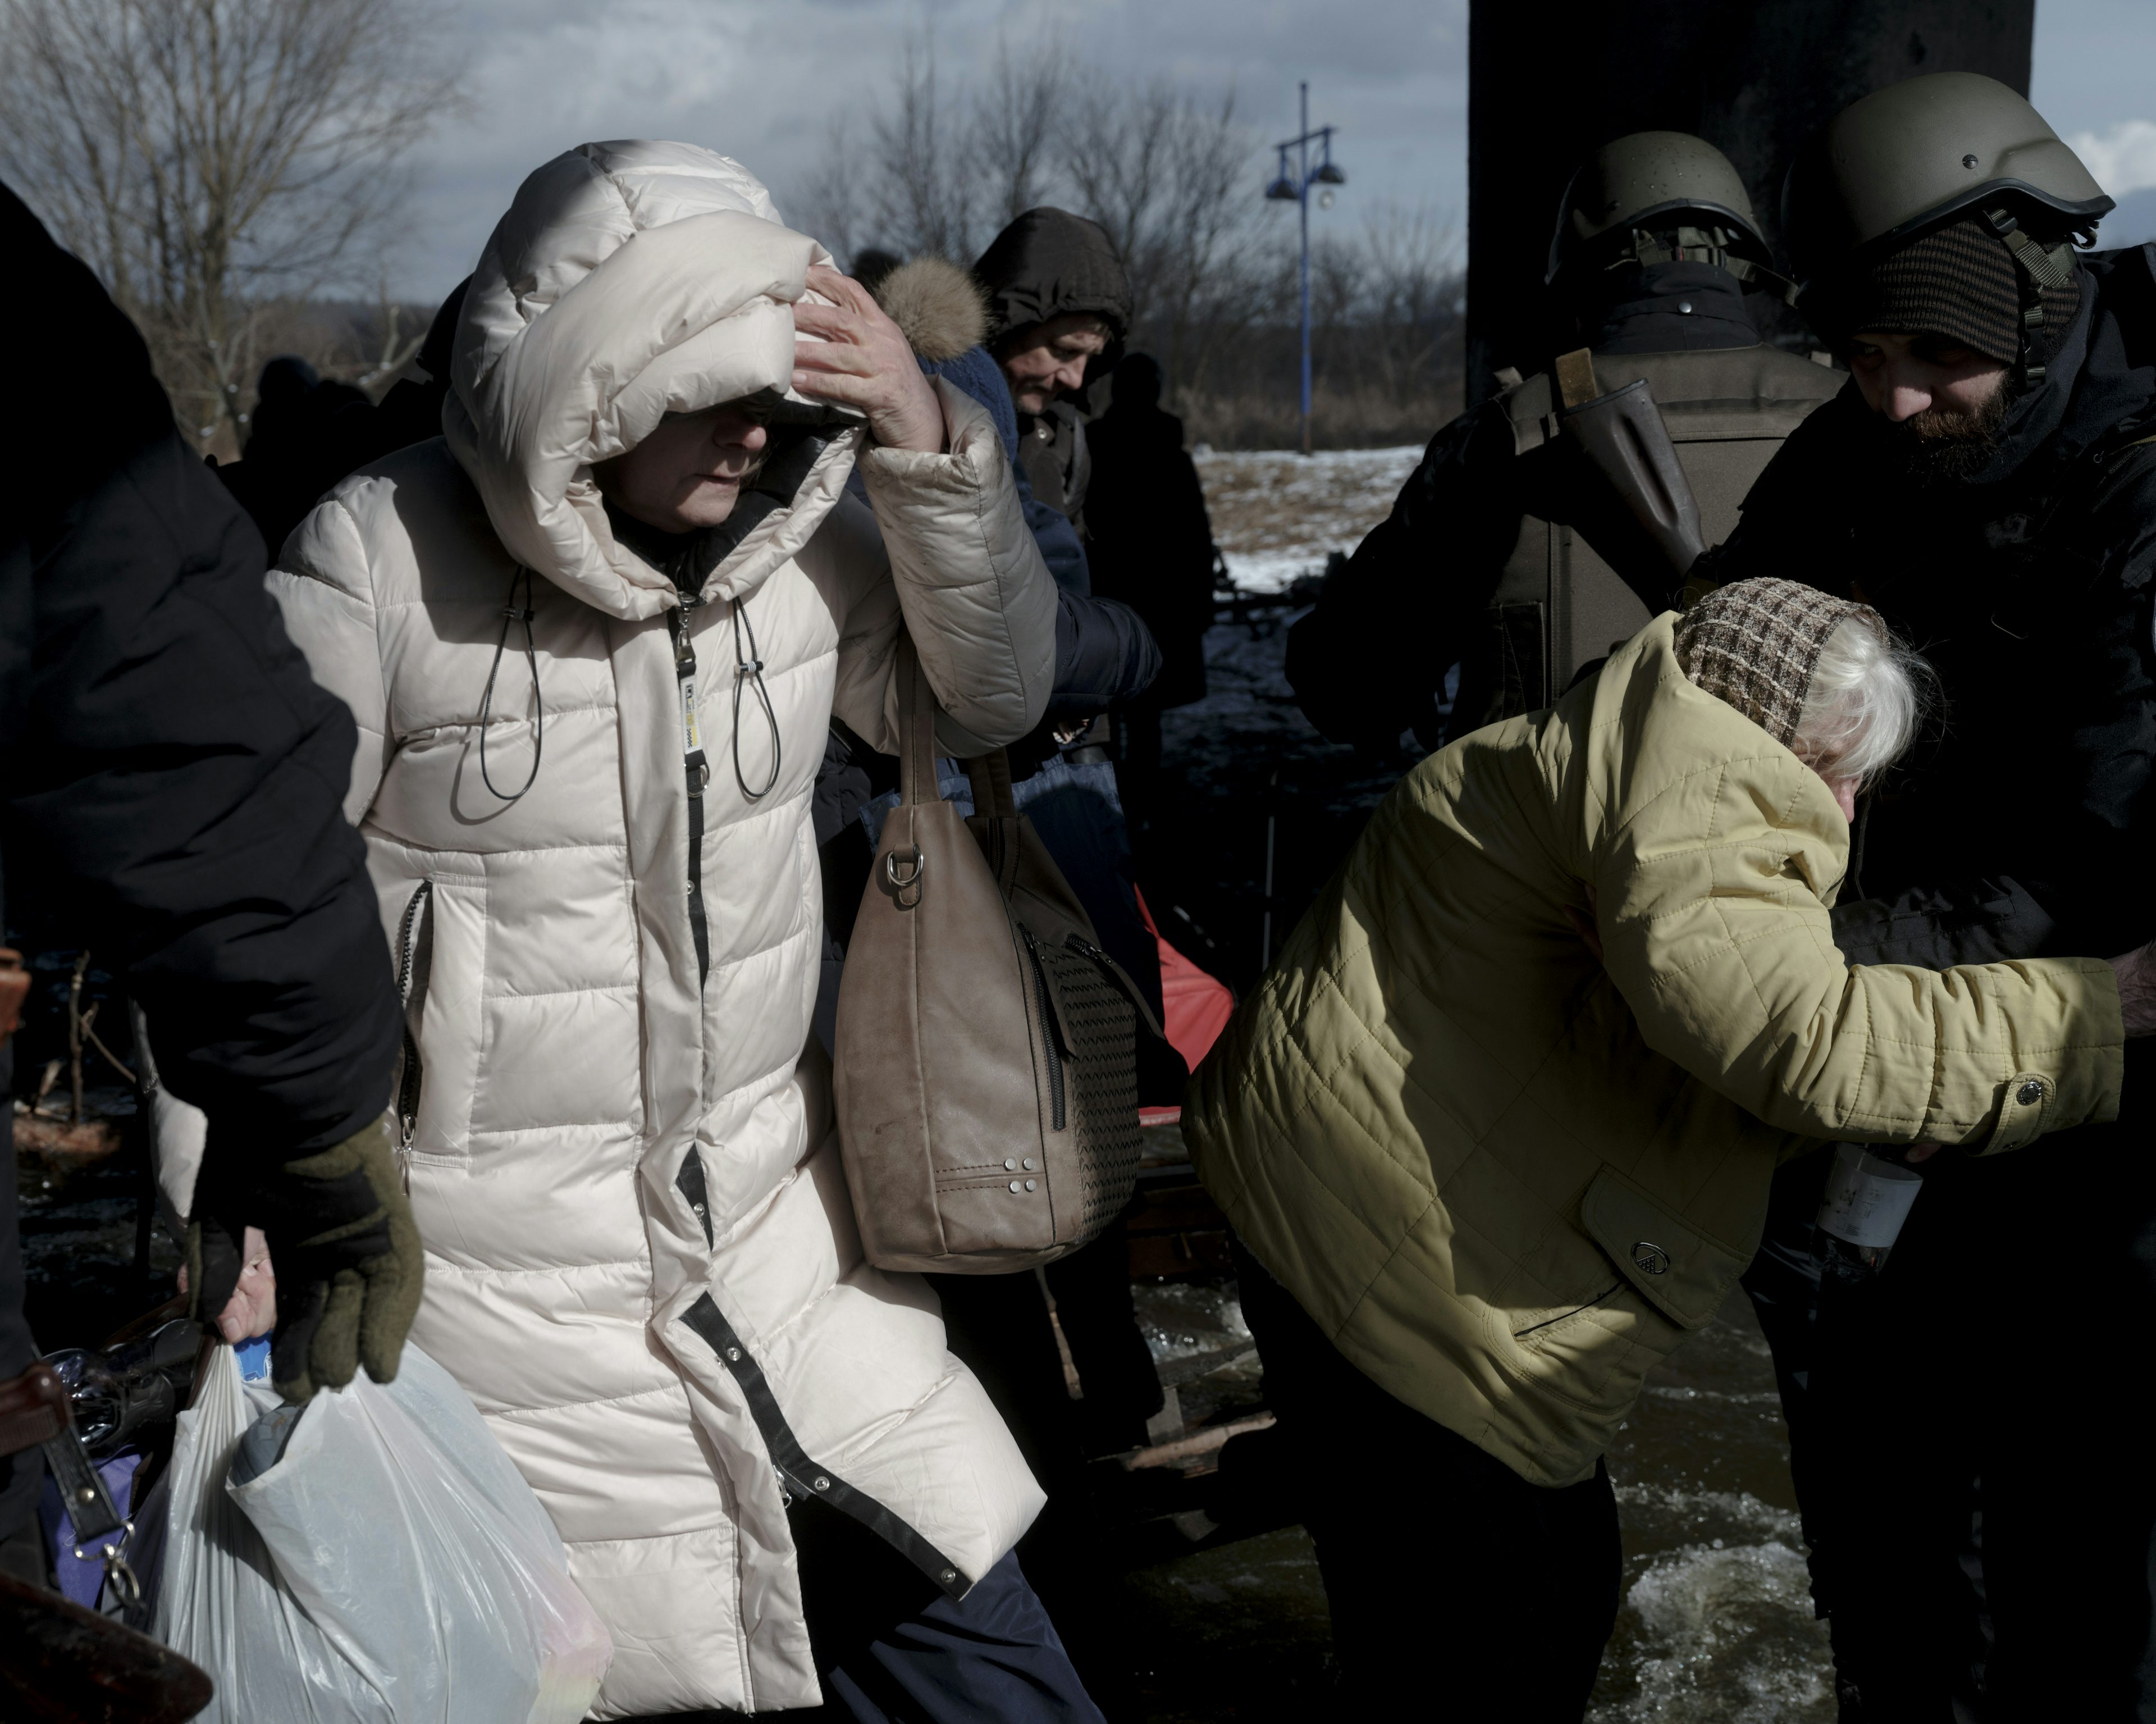 UKRAINE. Kyiv. 8 March 2022. The inhabitants of Irpin continued to leave the town during the evacuation while the Russian army advanced and took up positions inside the town. Photo by Lorenzo Meloni